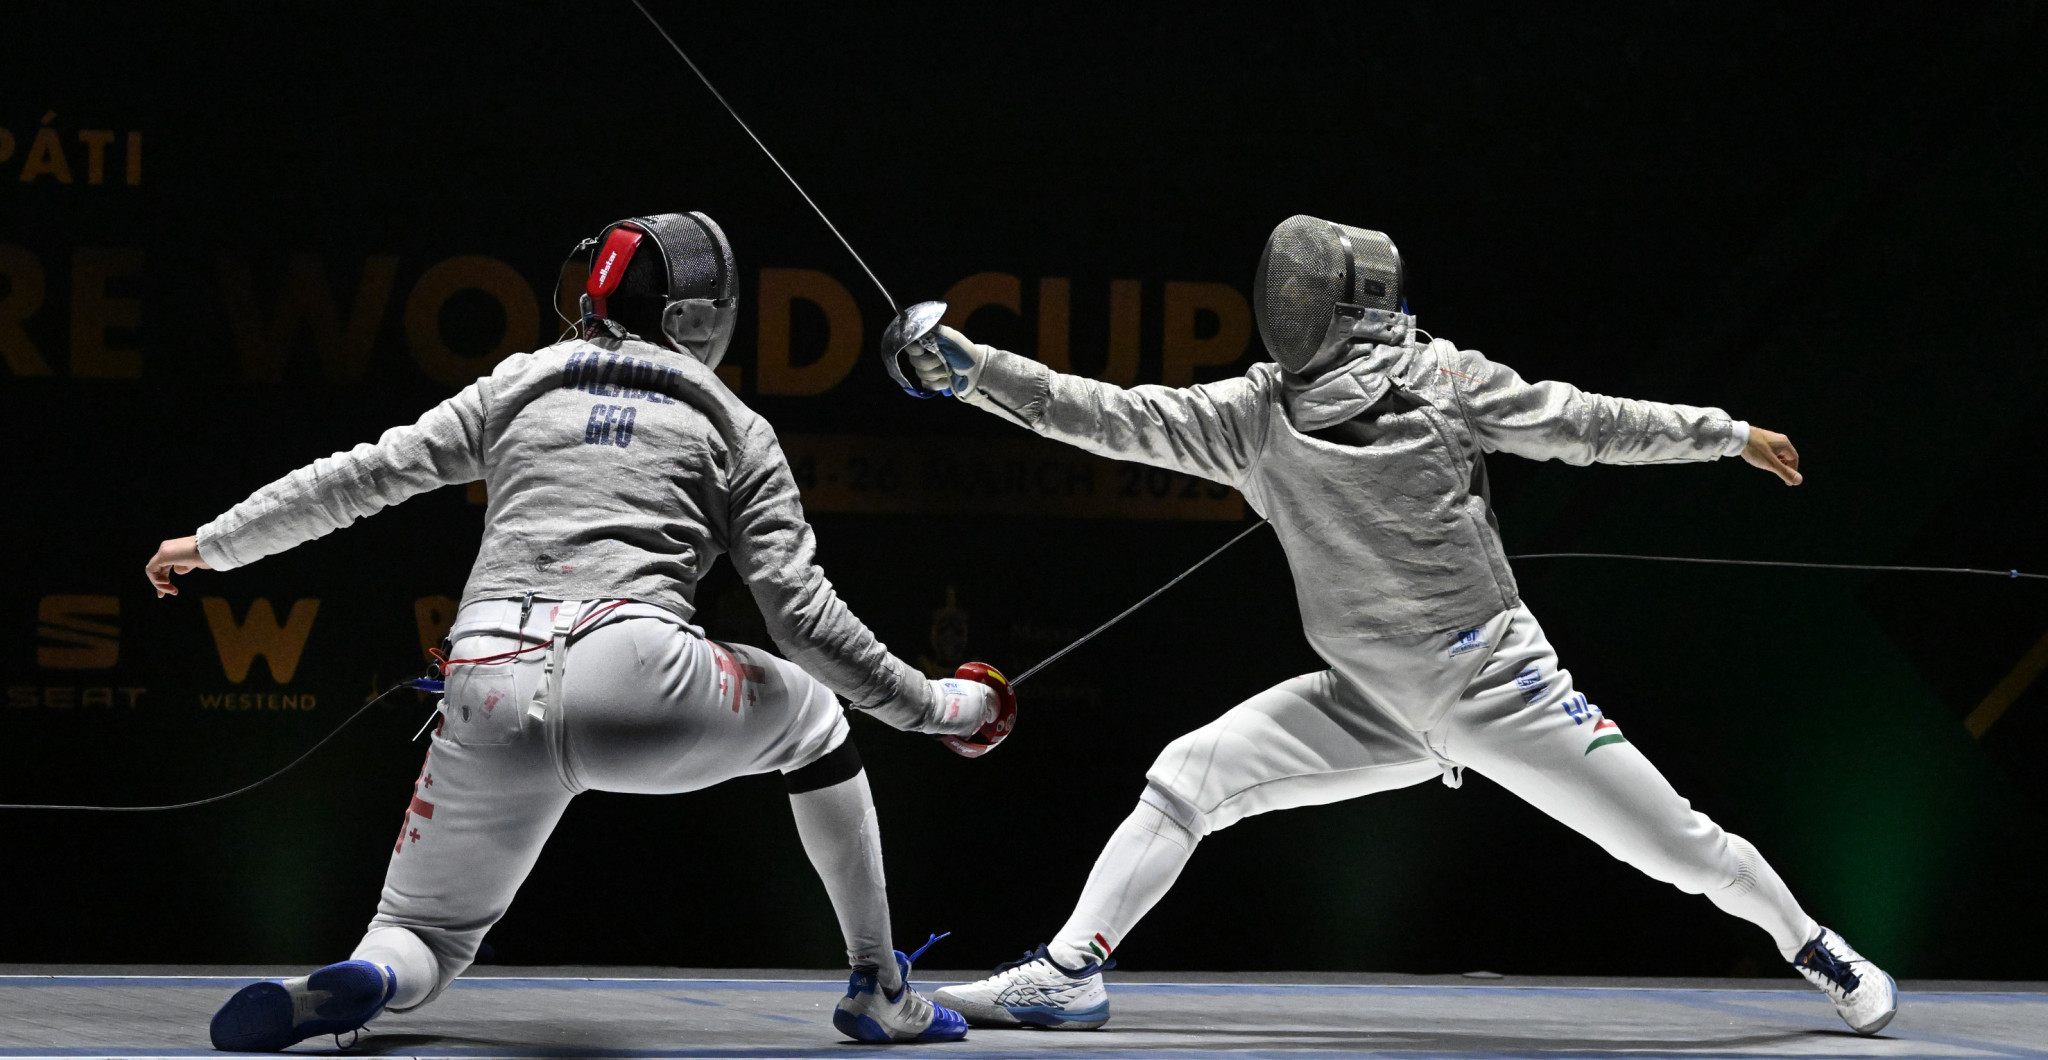 Áron Szilágyi won individual gold and team bronze at the Sabre World Cup in Budapest ©FIE